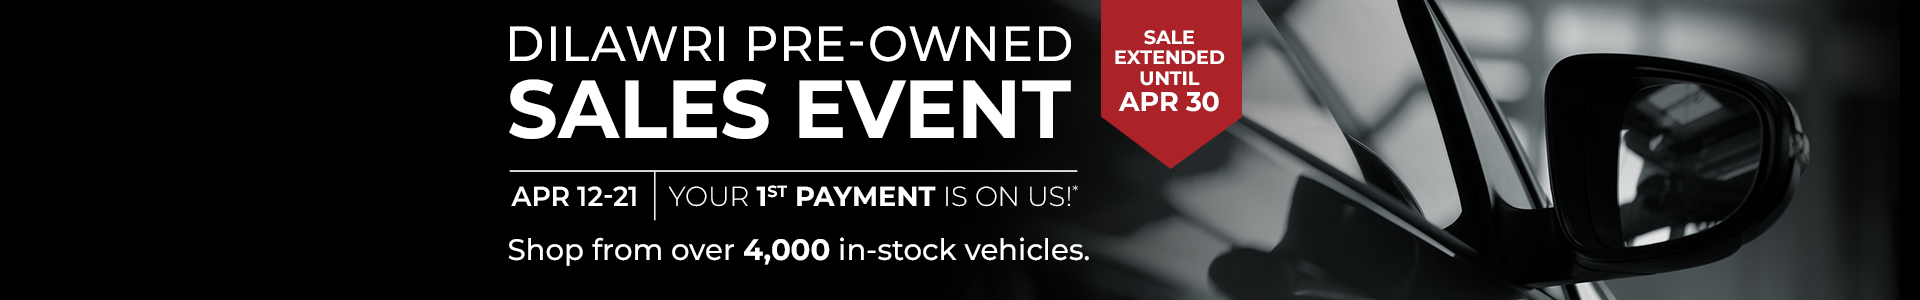 Dilawri Pre-owned Sales Event - Apr 12-21 - YOUR FIRST PAYMENT IS ON US!* Shop from over 4,000 in-stock vehicles. Sale extended until Apr 30